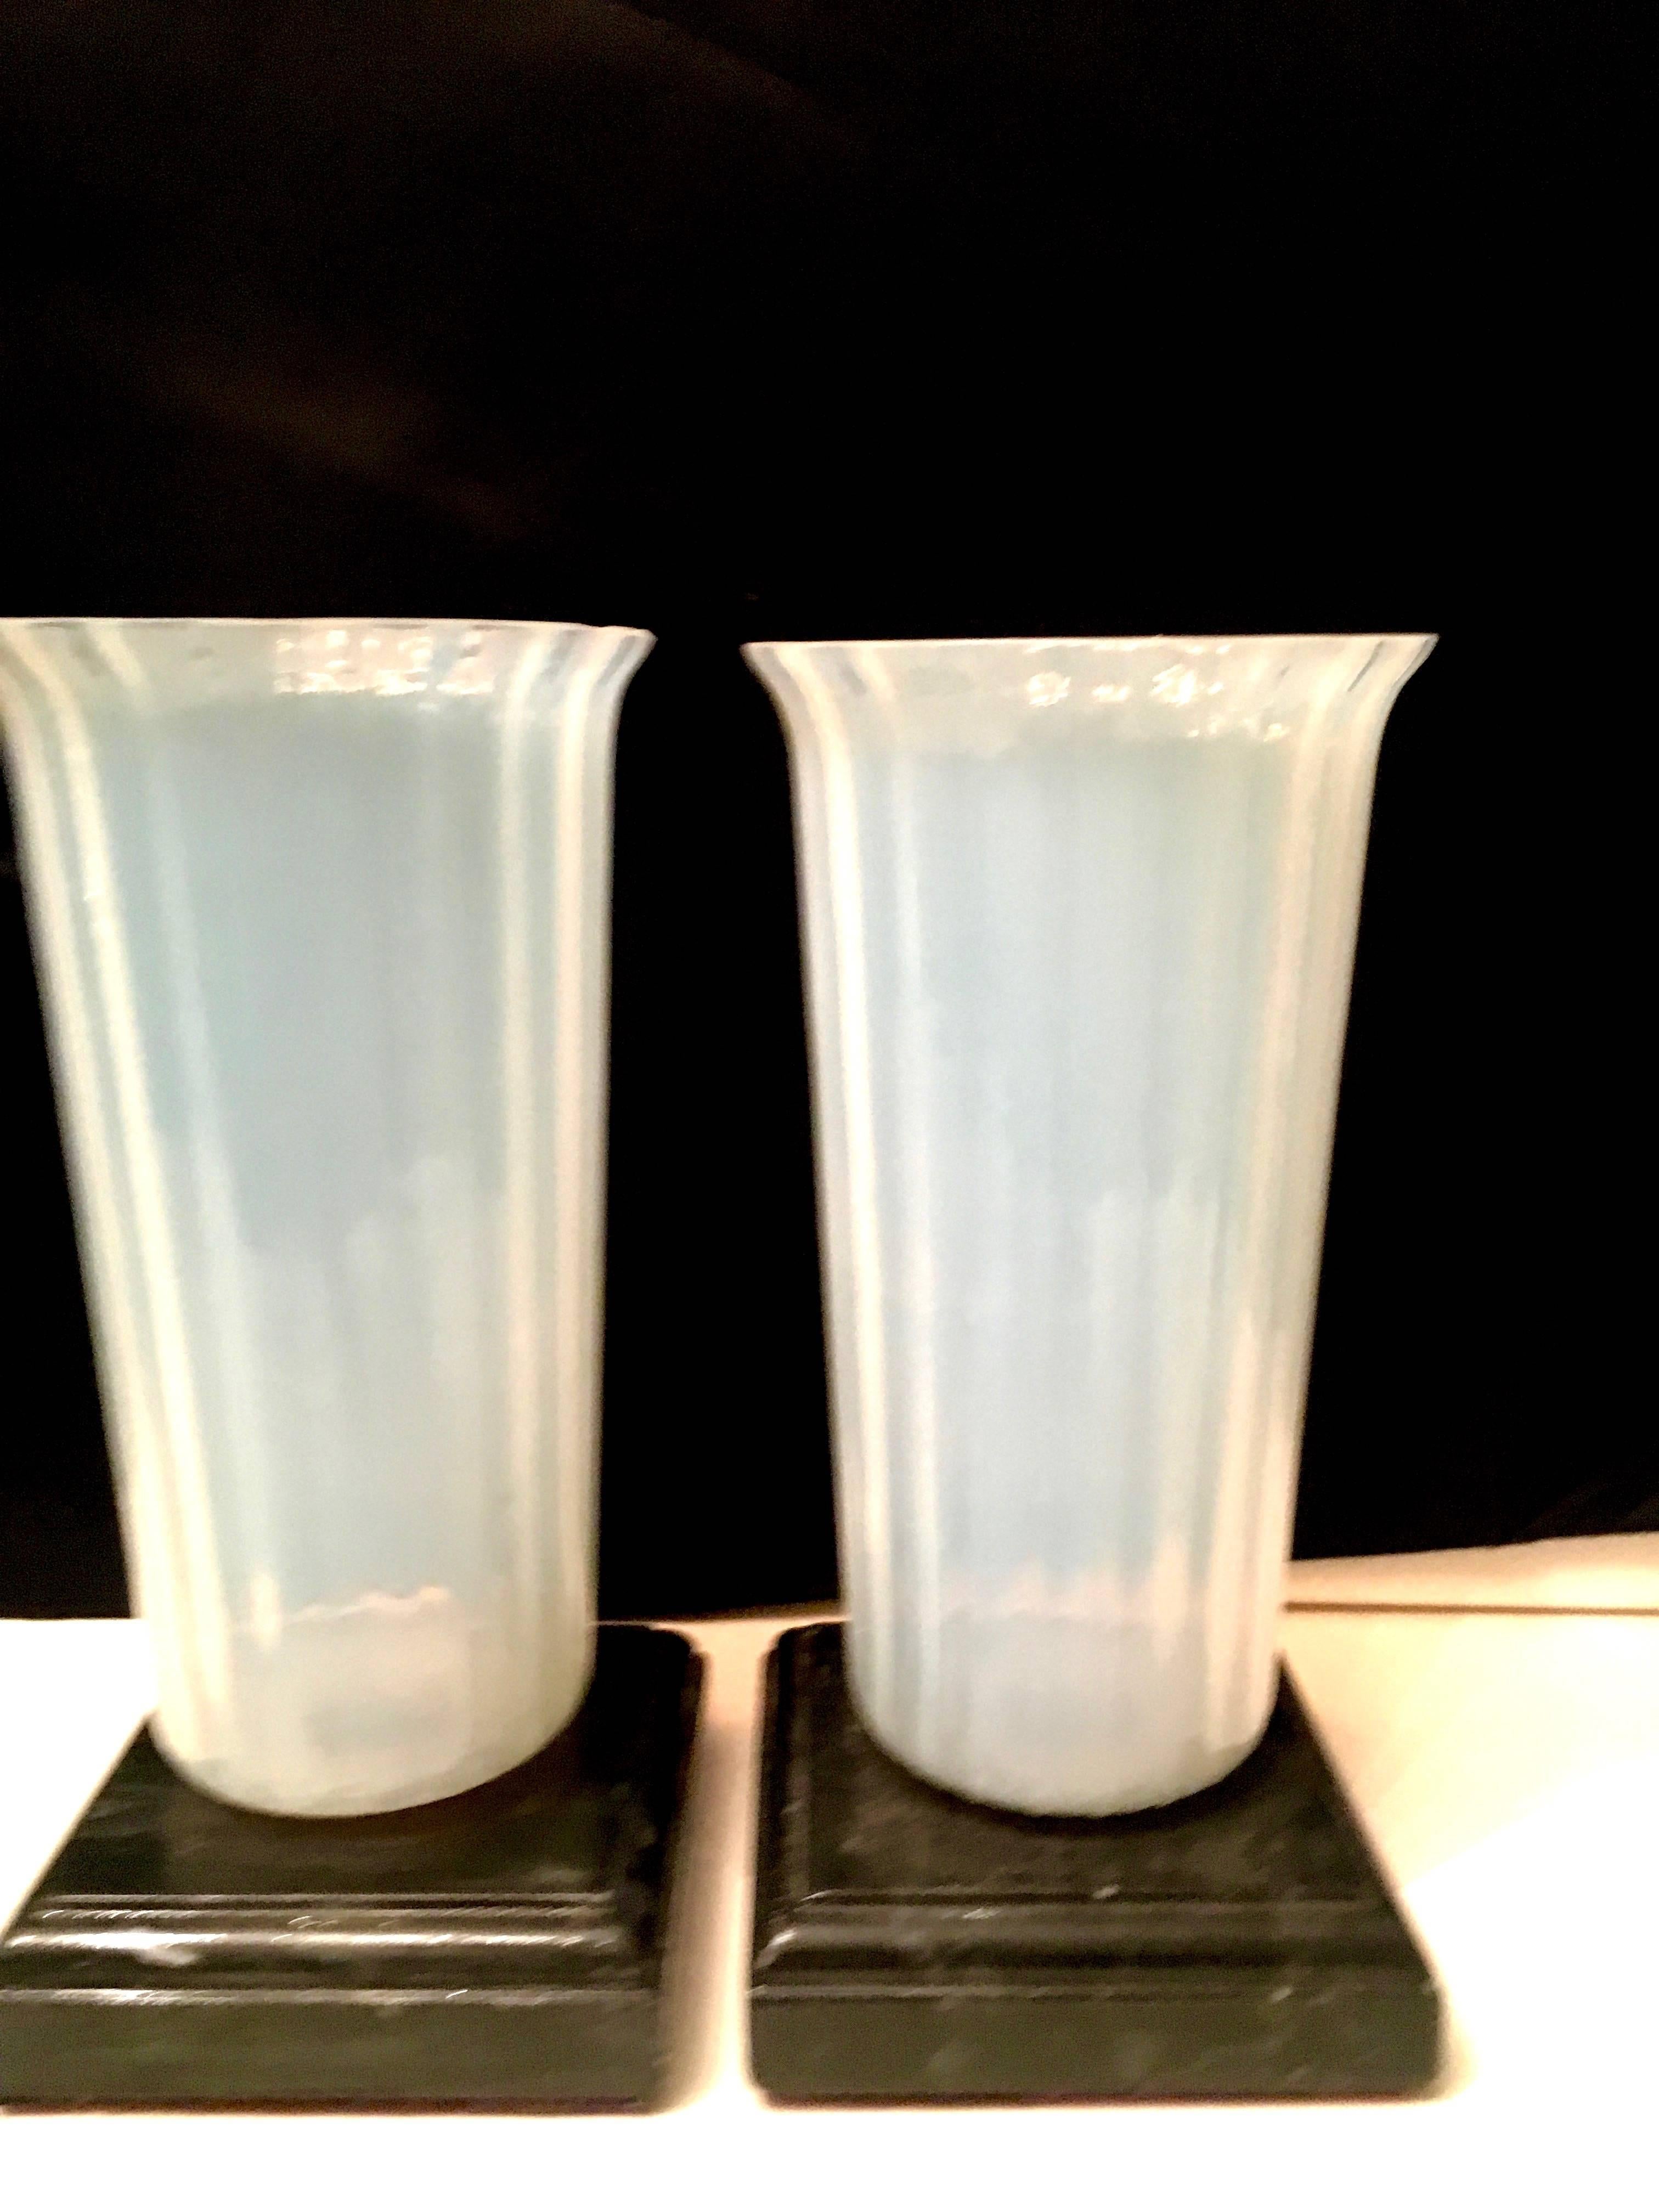 Pair of opaline Murano vases on marble bases a lovely compliment to any table mantel or shelf in mint vintage condition.

Darren Ransdell design.